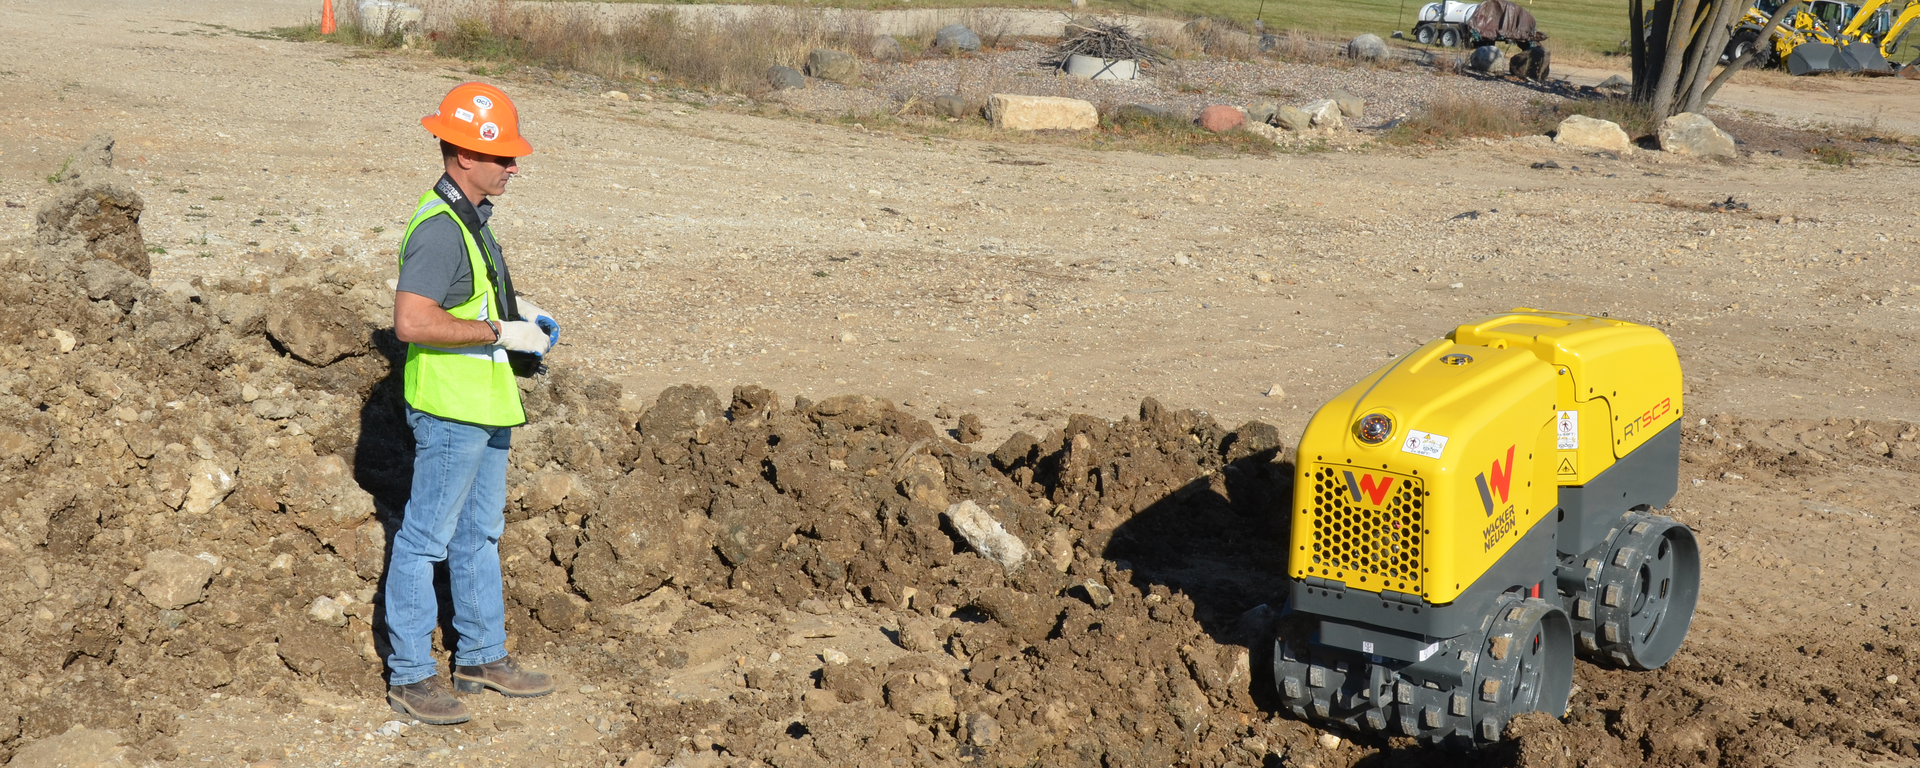 Wacker Neuson RTSC3 trench roller in action on a construction site.